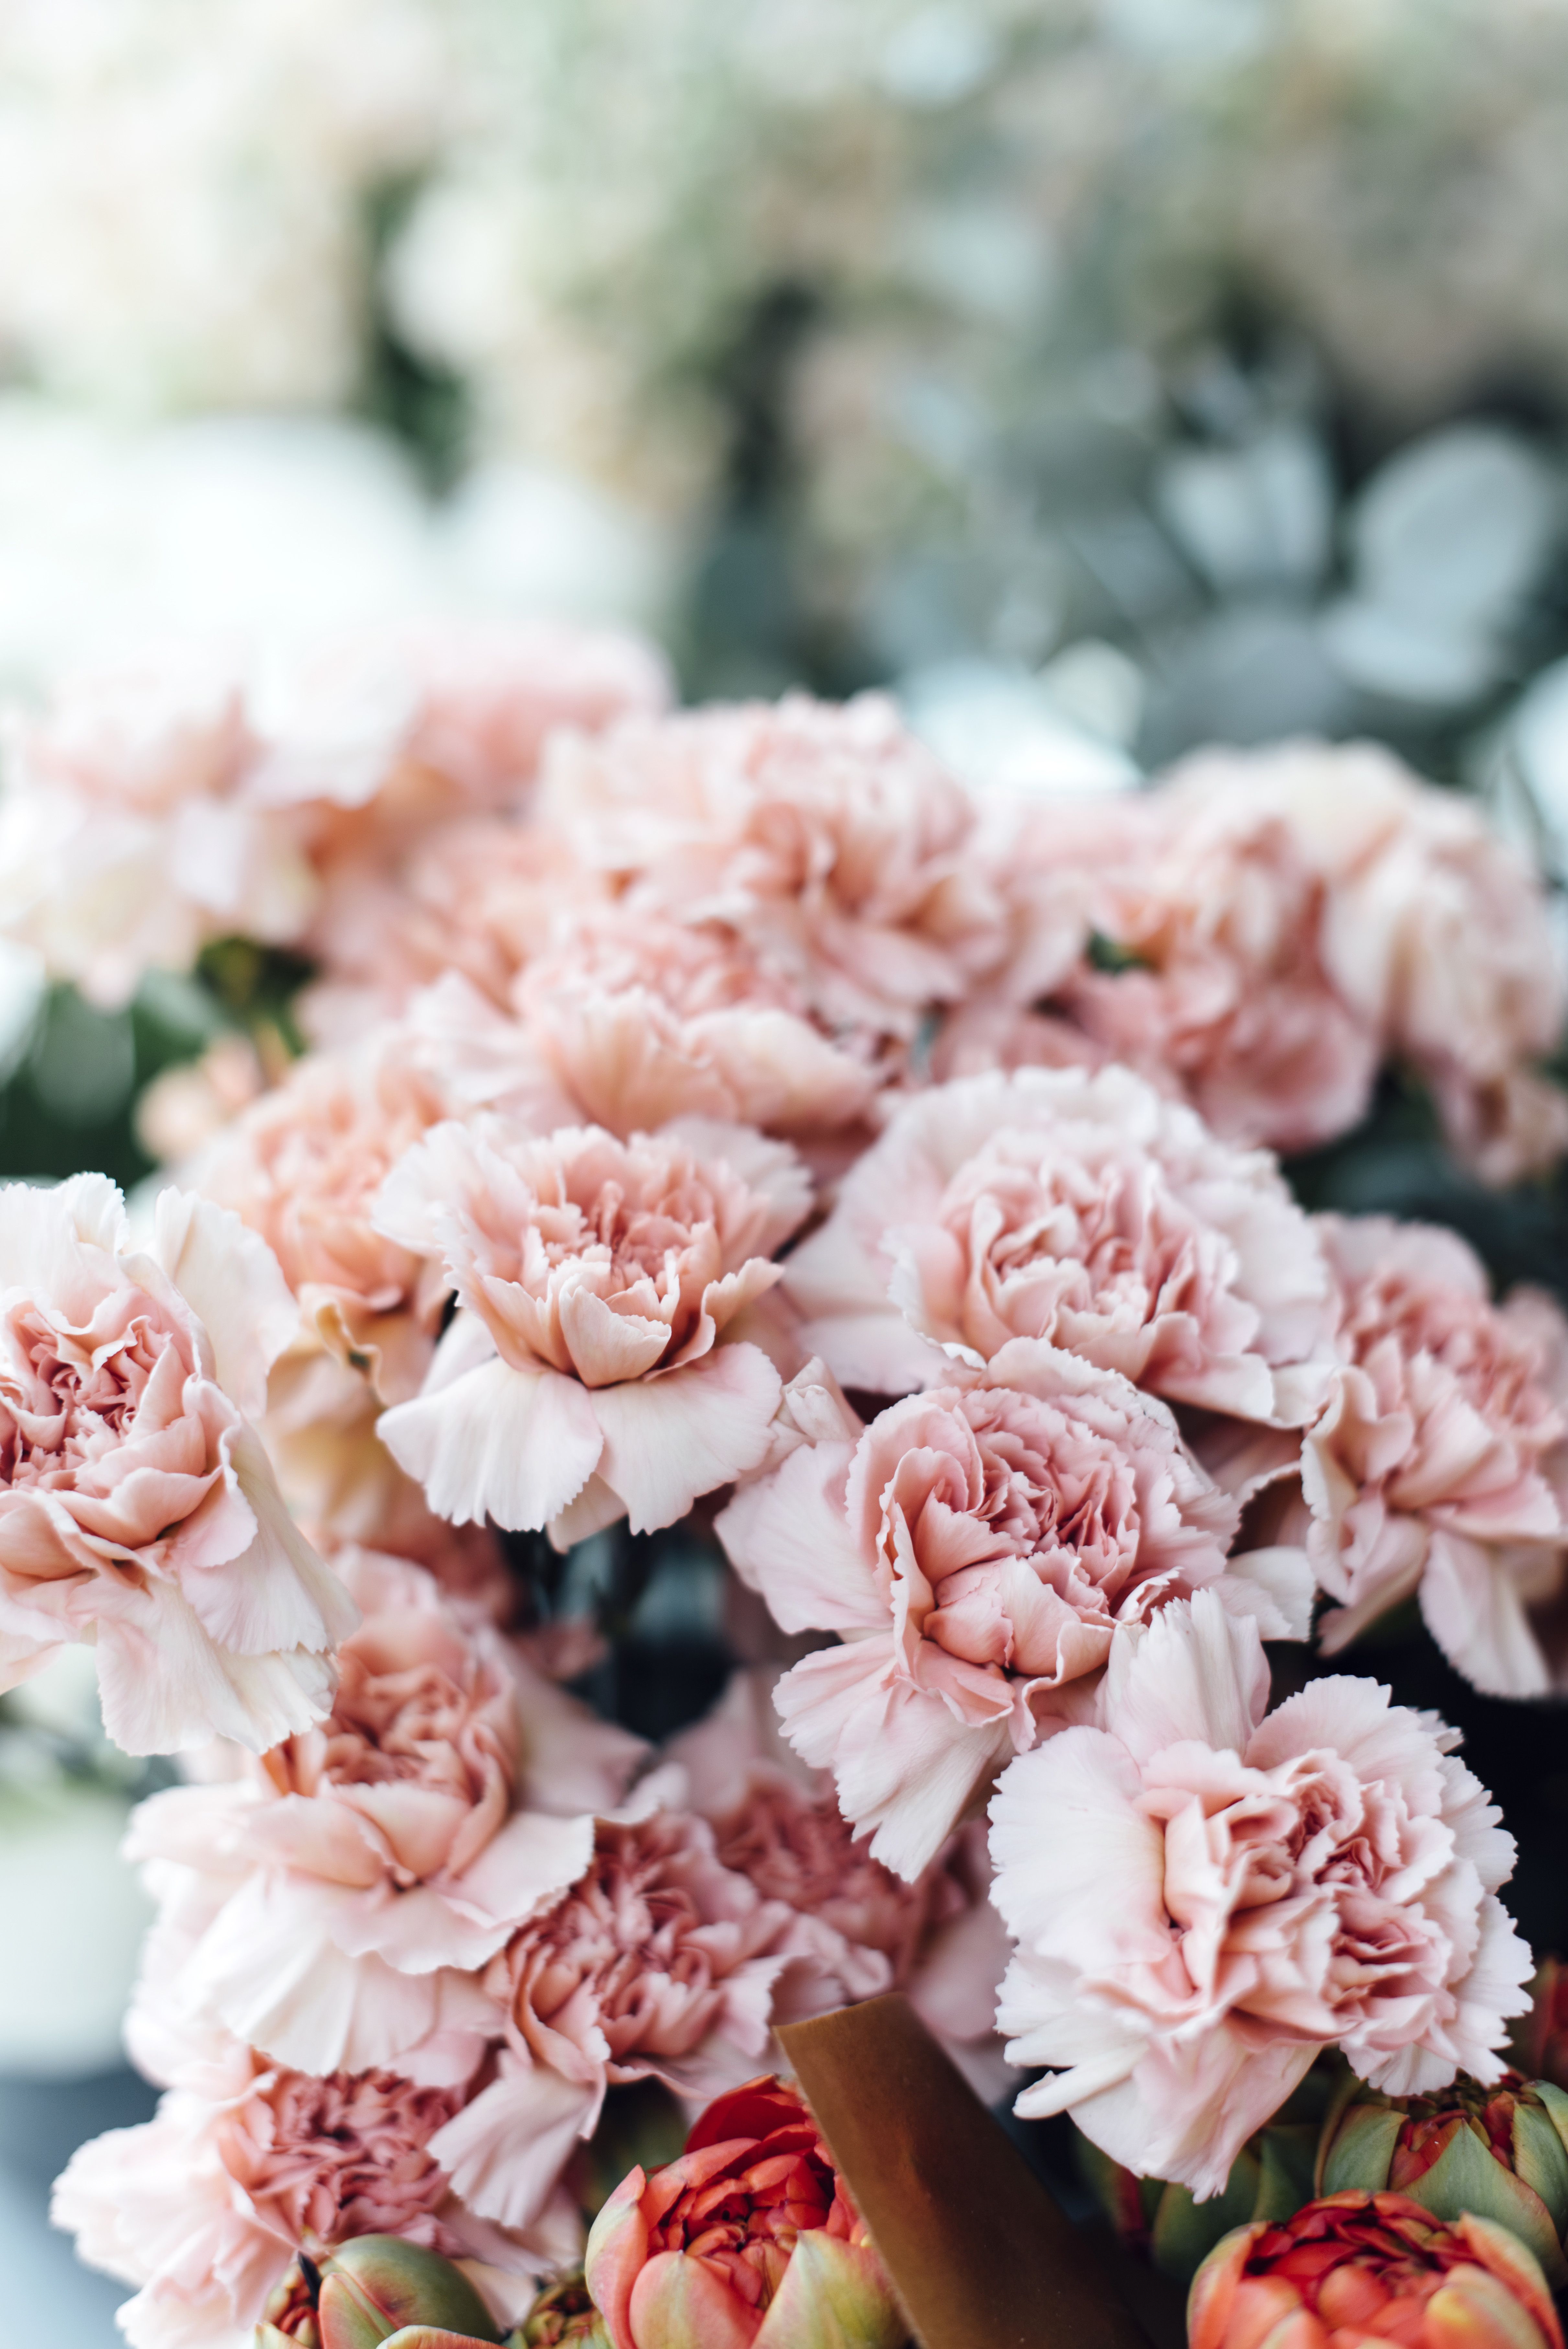 6 Reasons To Bring Back The Carnation